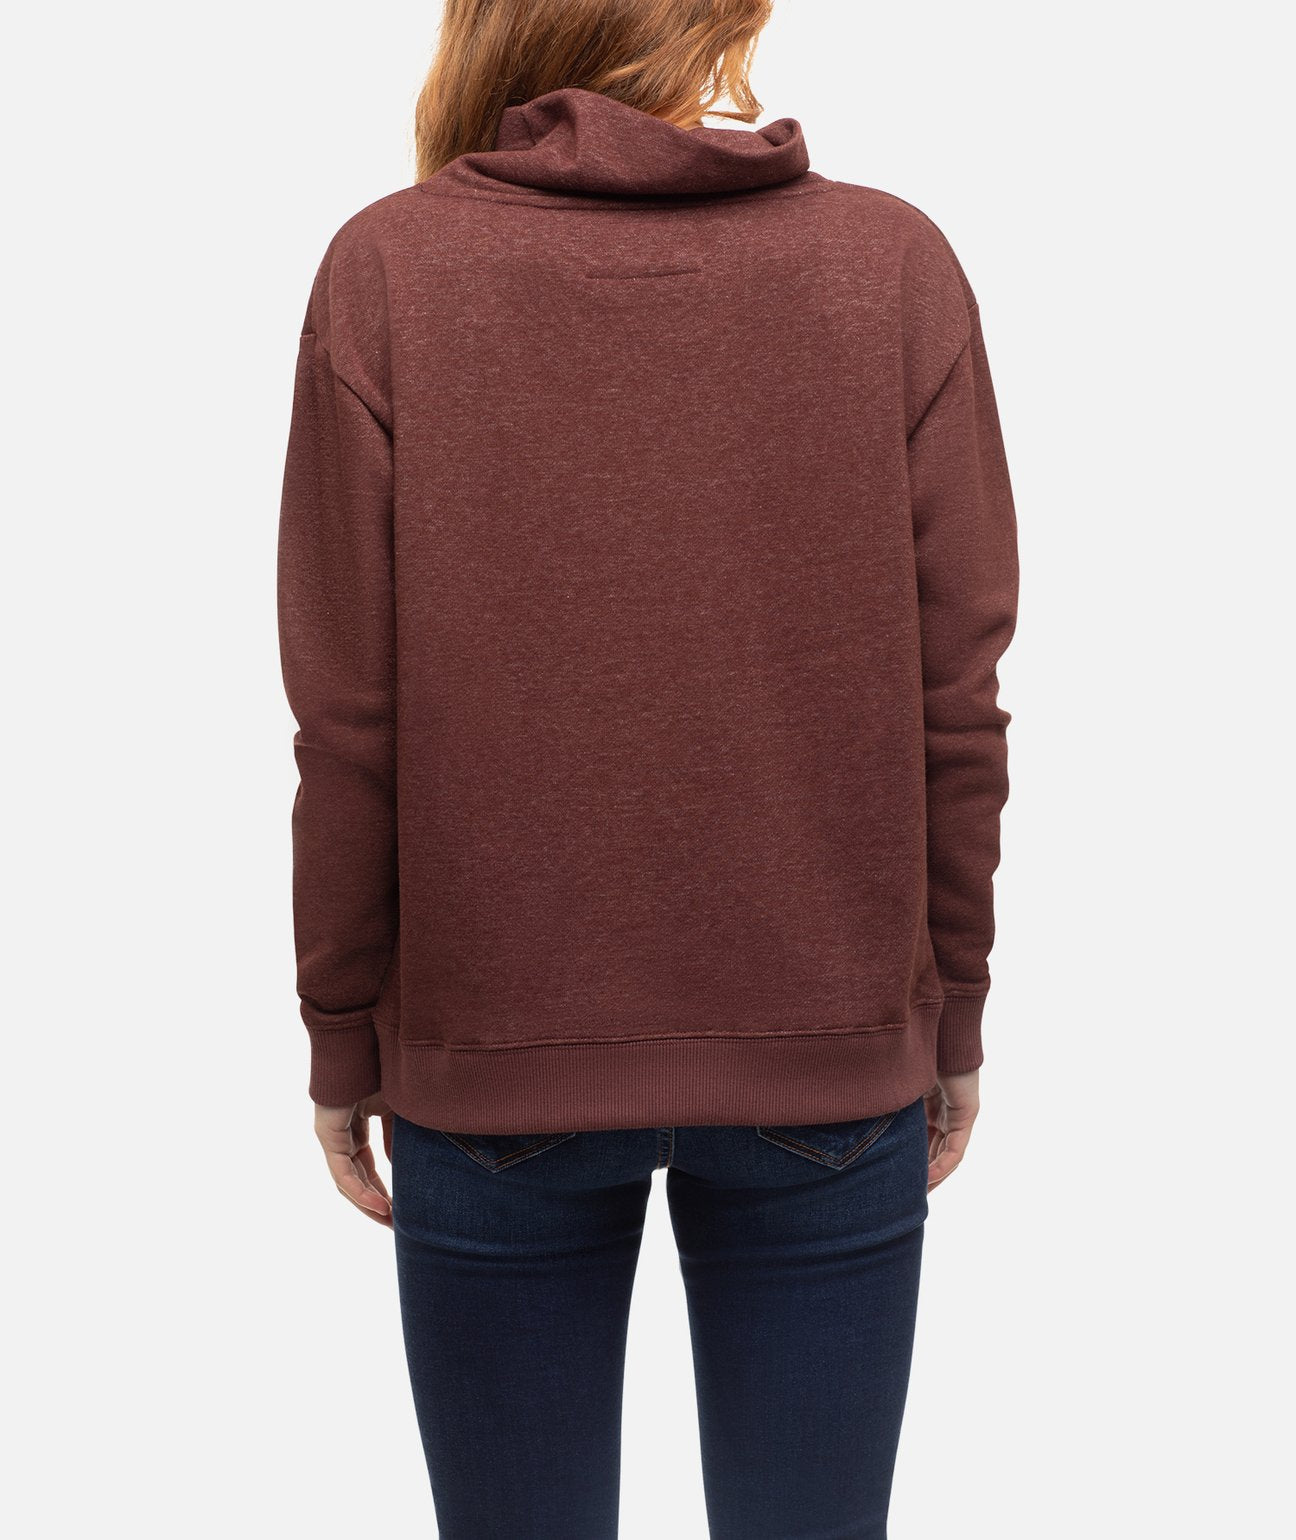 Women's Catalina Pullover - The Lake and Company